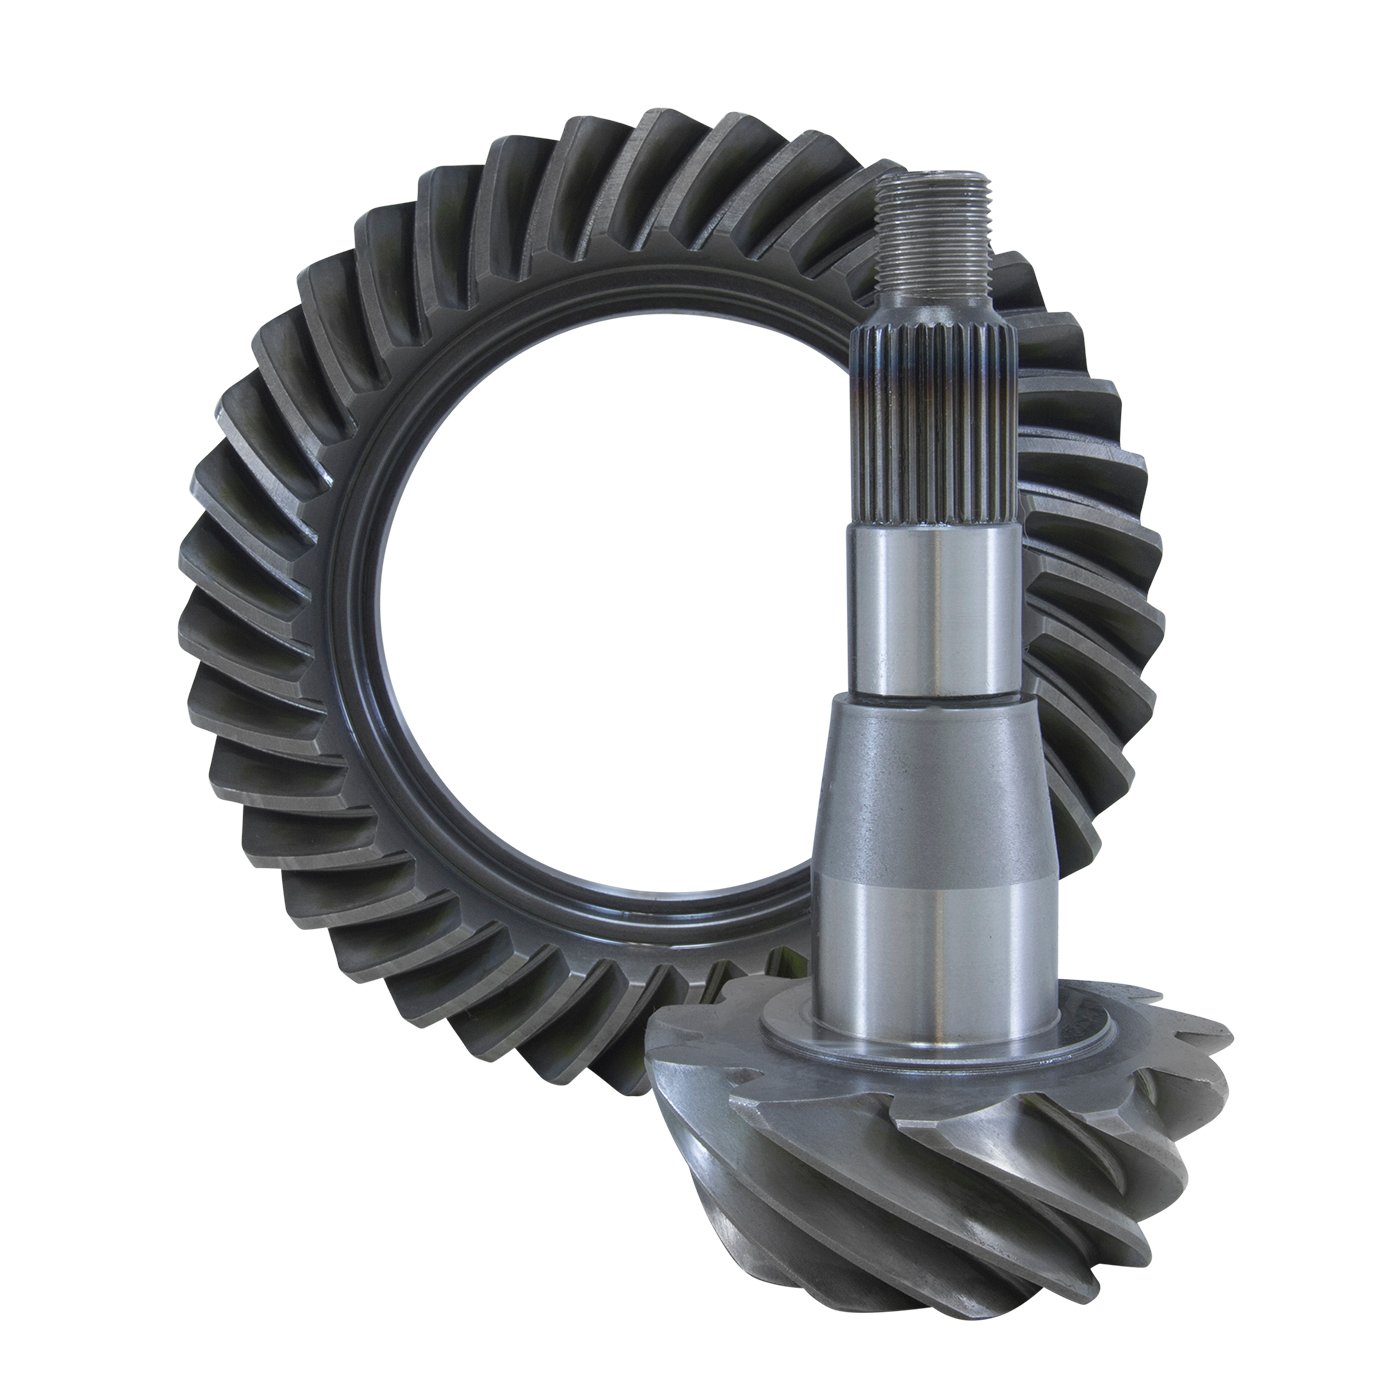 USA Standard 36360 Ring & Pinion Gear Set, For '11 & Up Chrysler 9.25 Zf, 4.11 Ratio